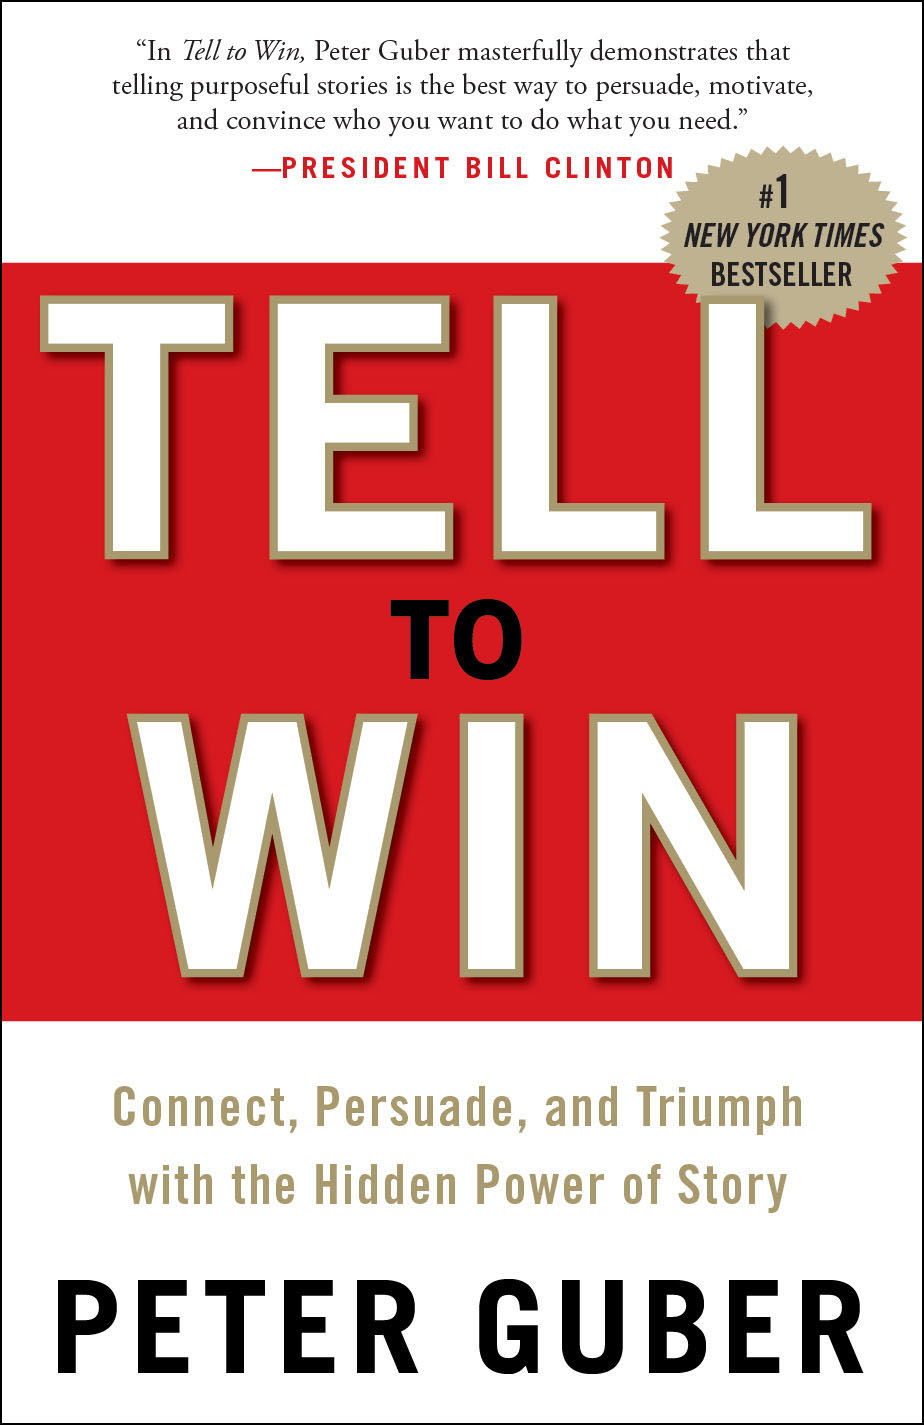 Peter Guber - Tell to Win